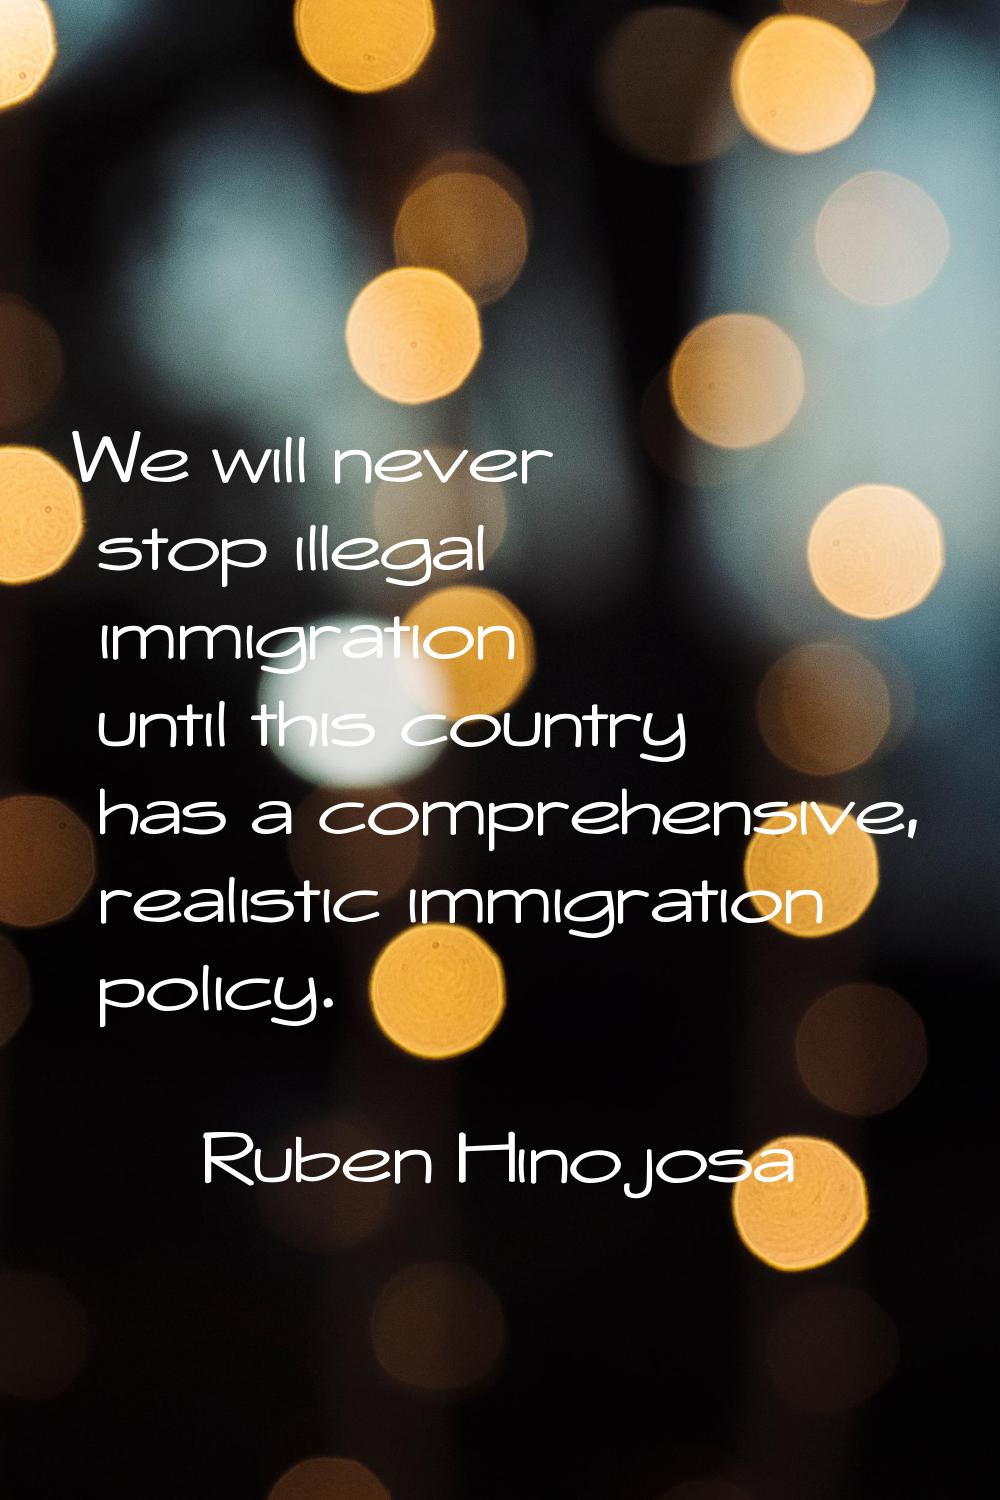 We will never stop illegal immigration until this country has a comprehensive, realistic immigratio